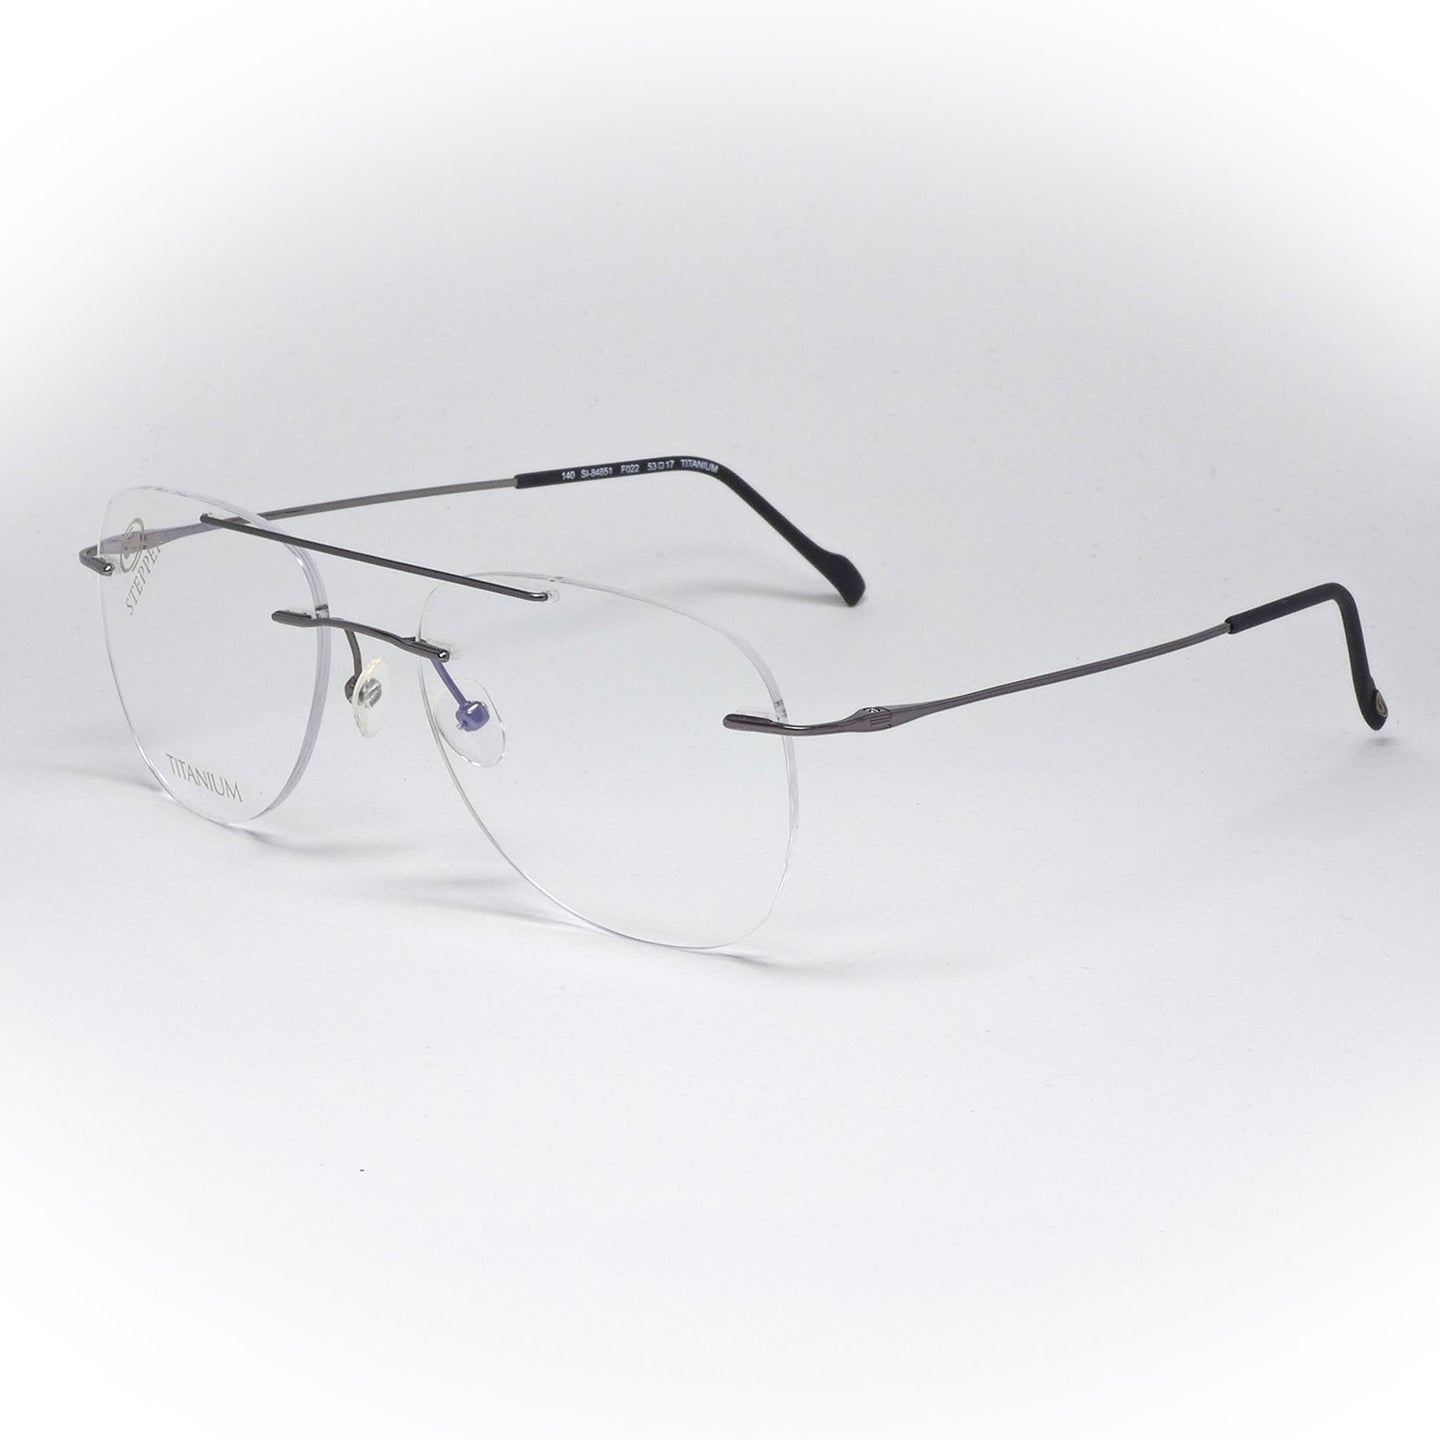 glasses stepper model 84851 color f084 angled view